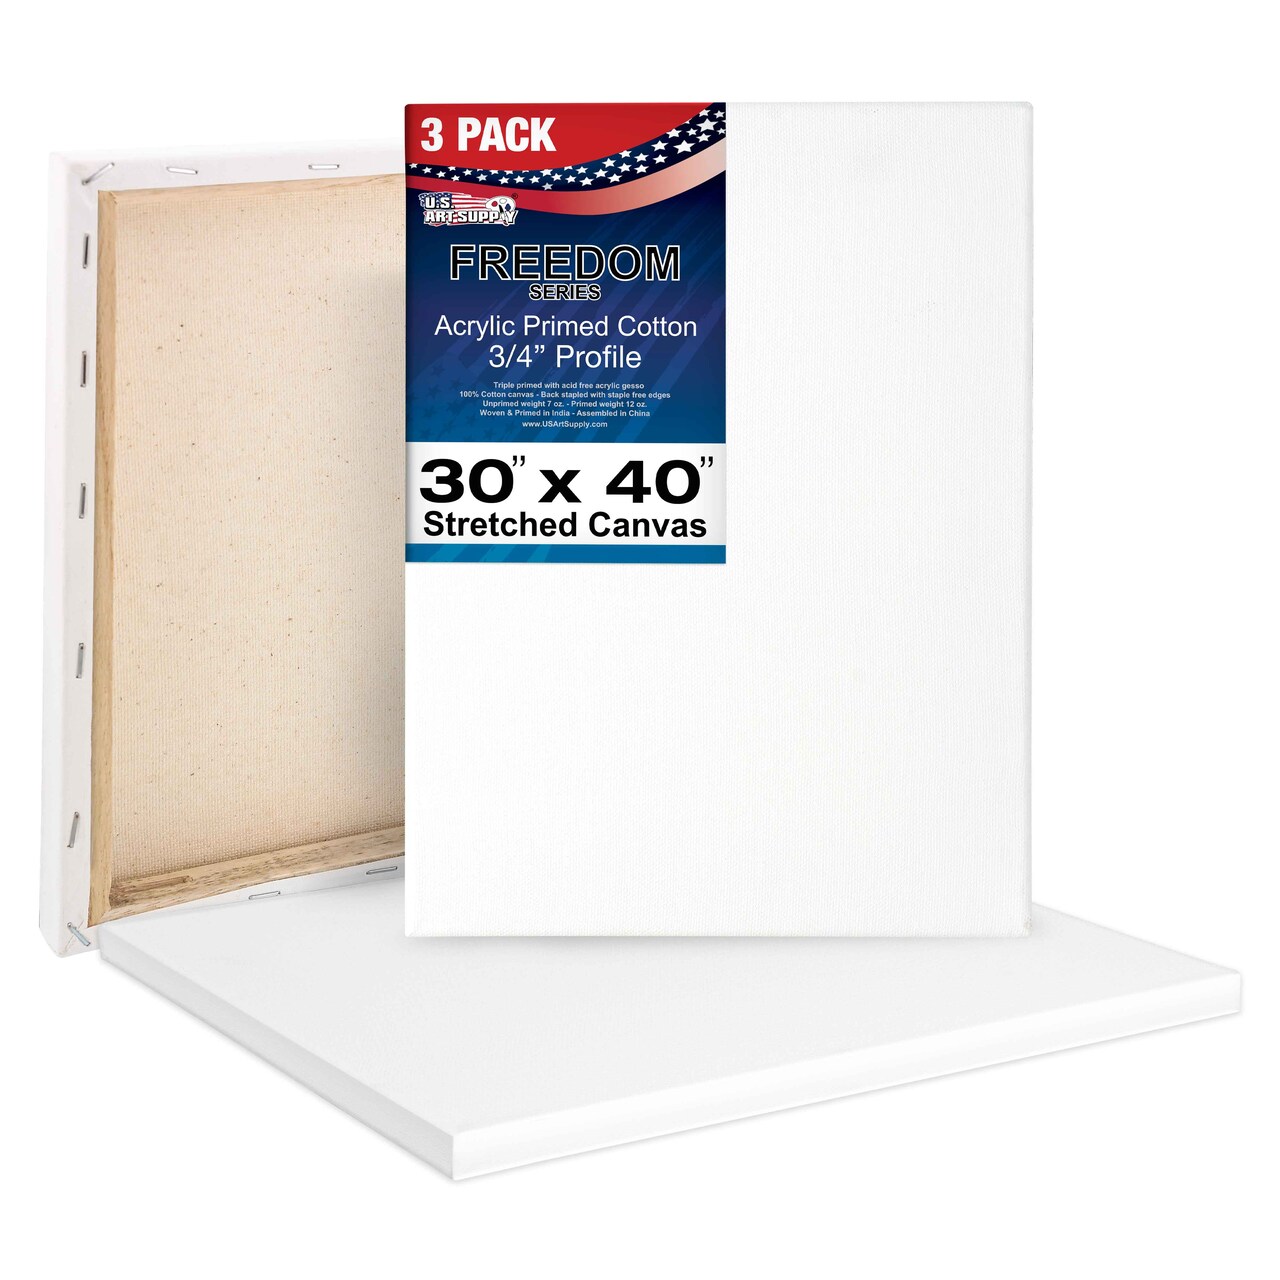 30 x 40 inch Stretched Canvas 12-Ounce Triple Primed, 3-Pack